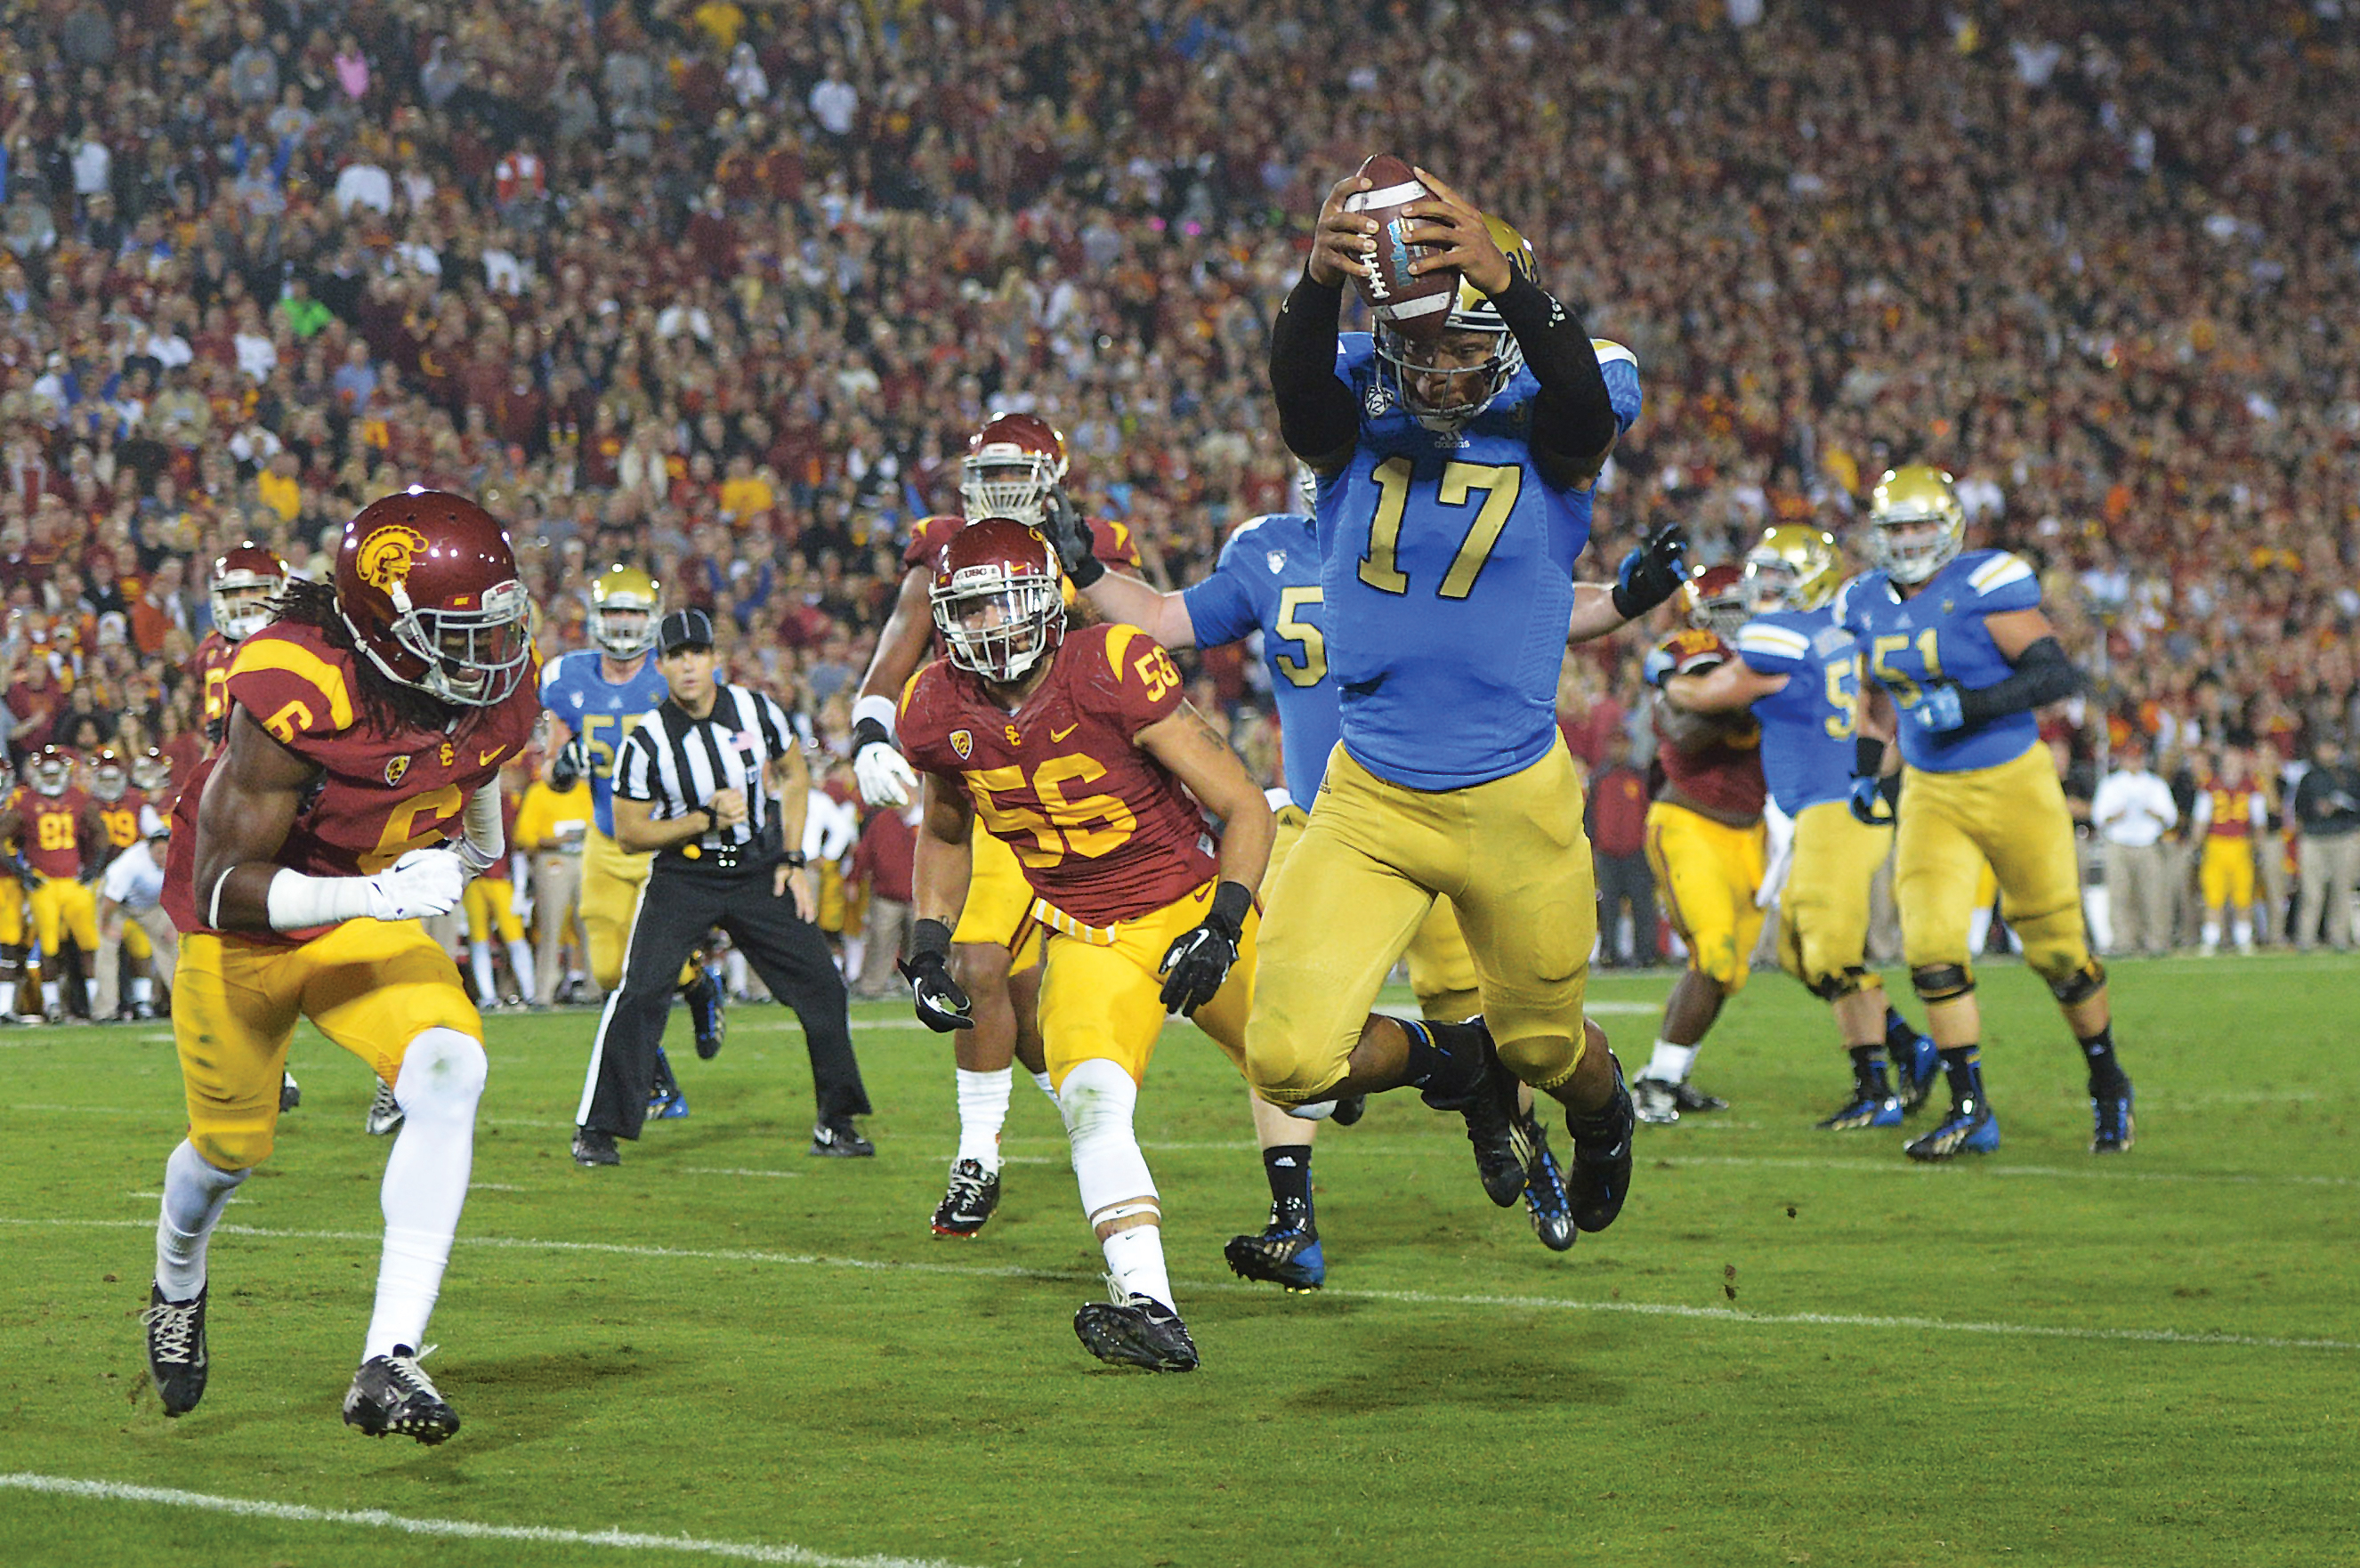 usc-vs-ucla-a-cardinal-and-gold-against-blue-and-gold-rivalry